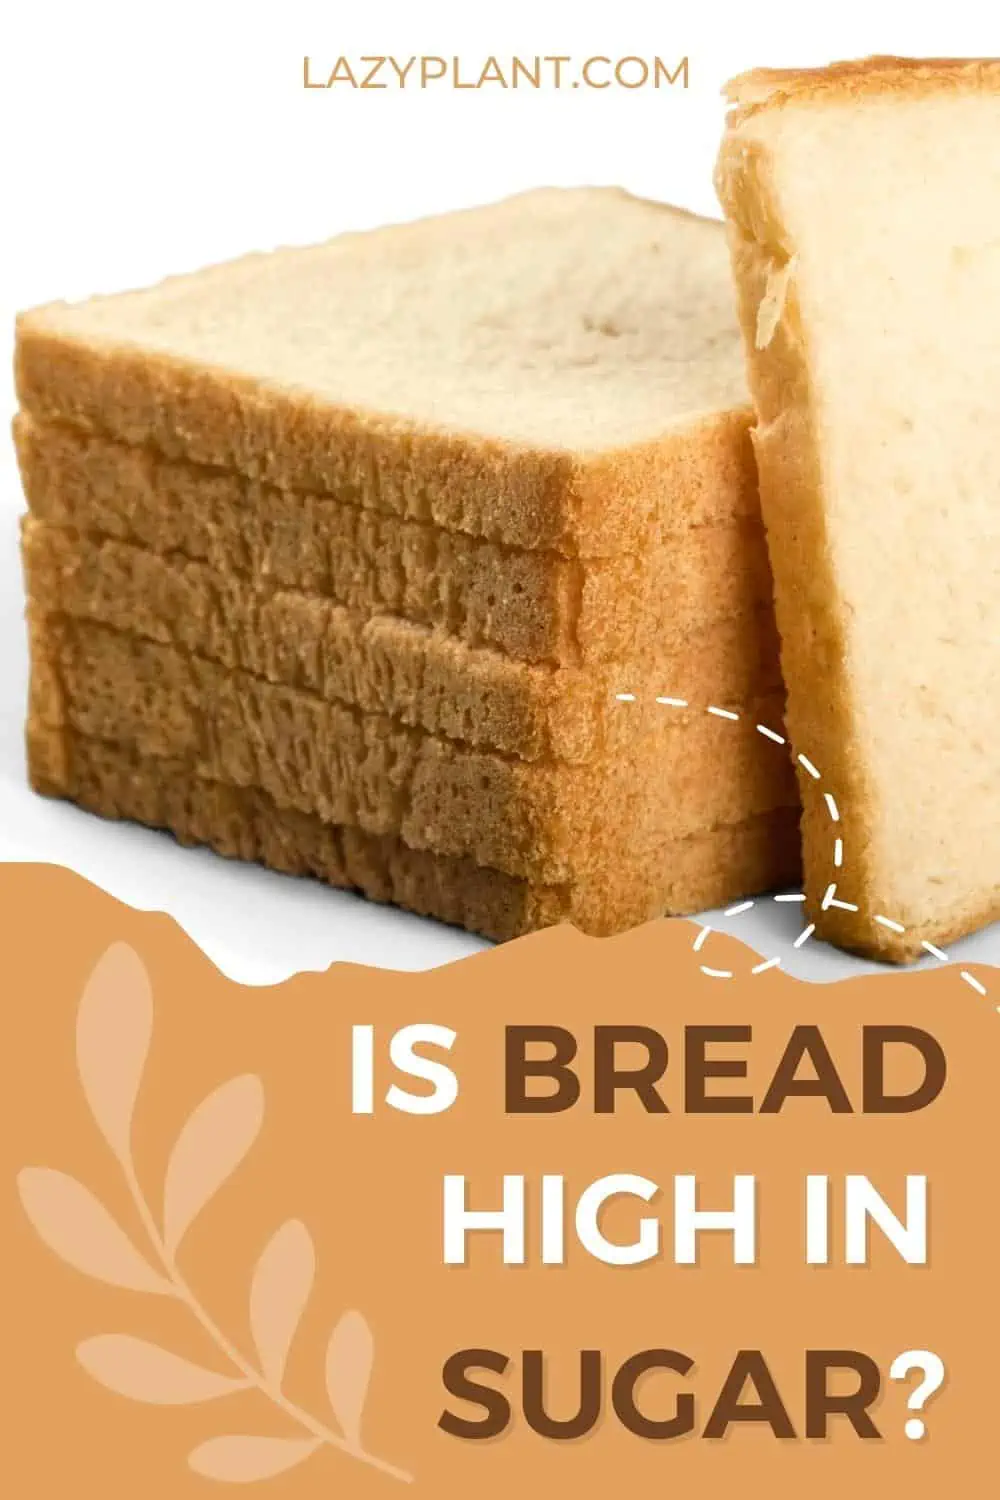 Among bread varieties, which one has the smallest sugar content?